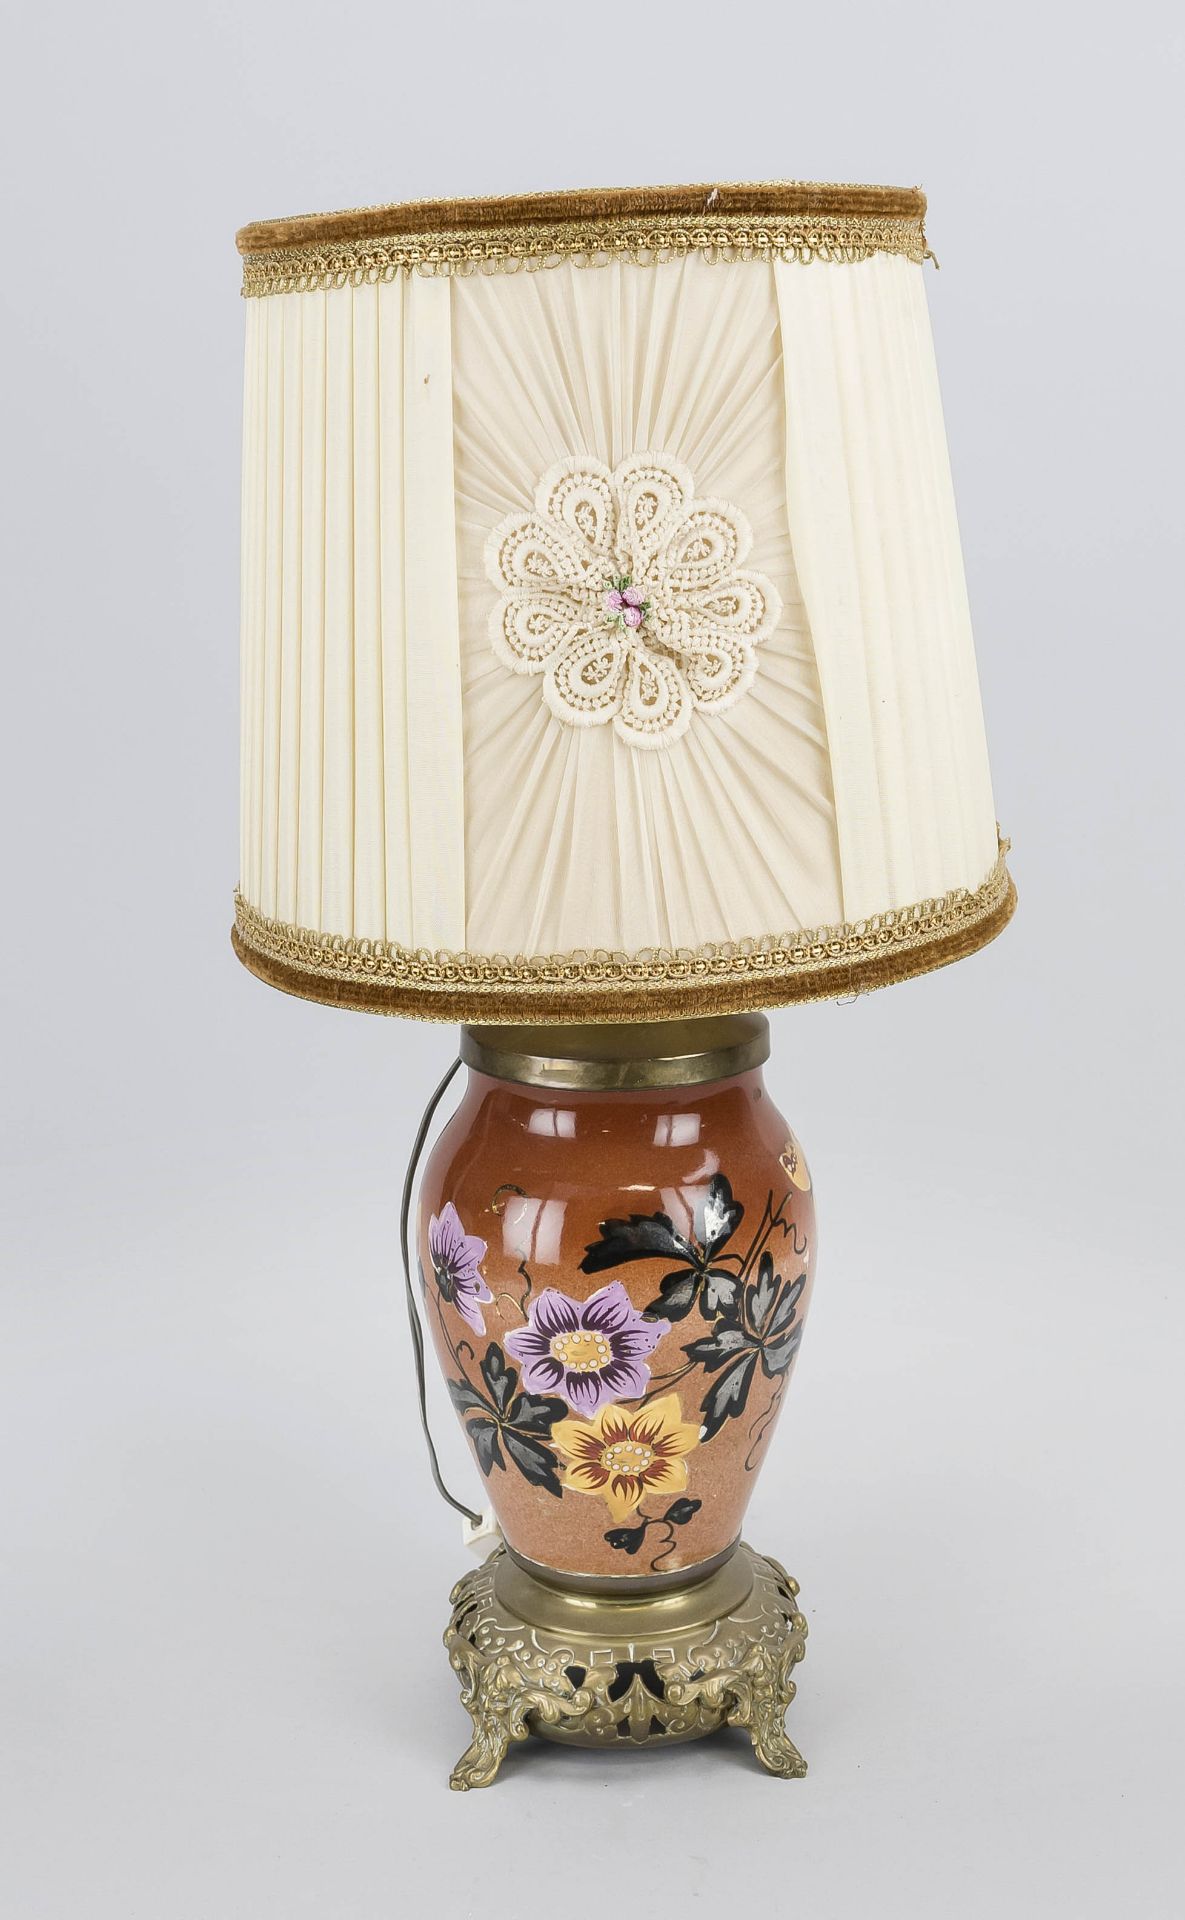 Table lamp c. 1900, ceramic vase with floral painting on brass construction, h. 56 cm